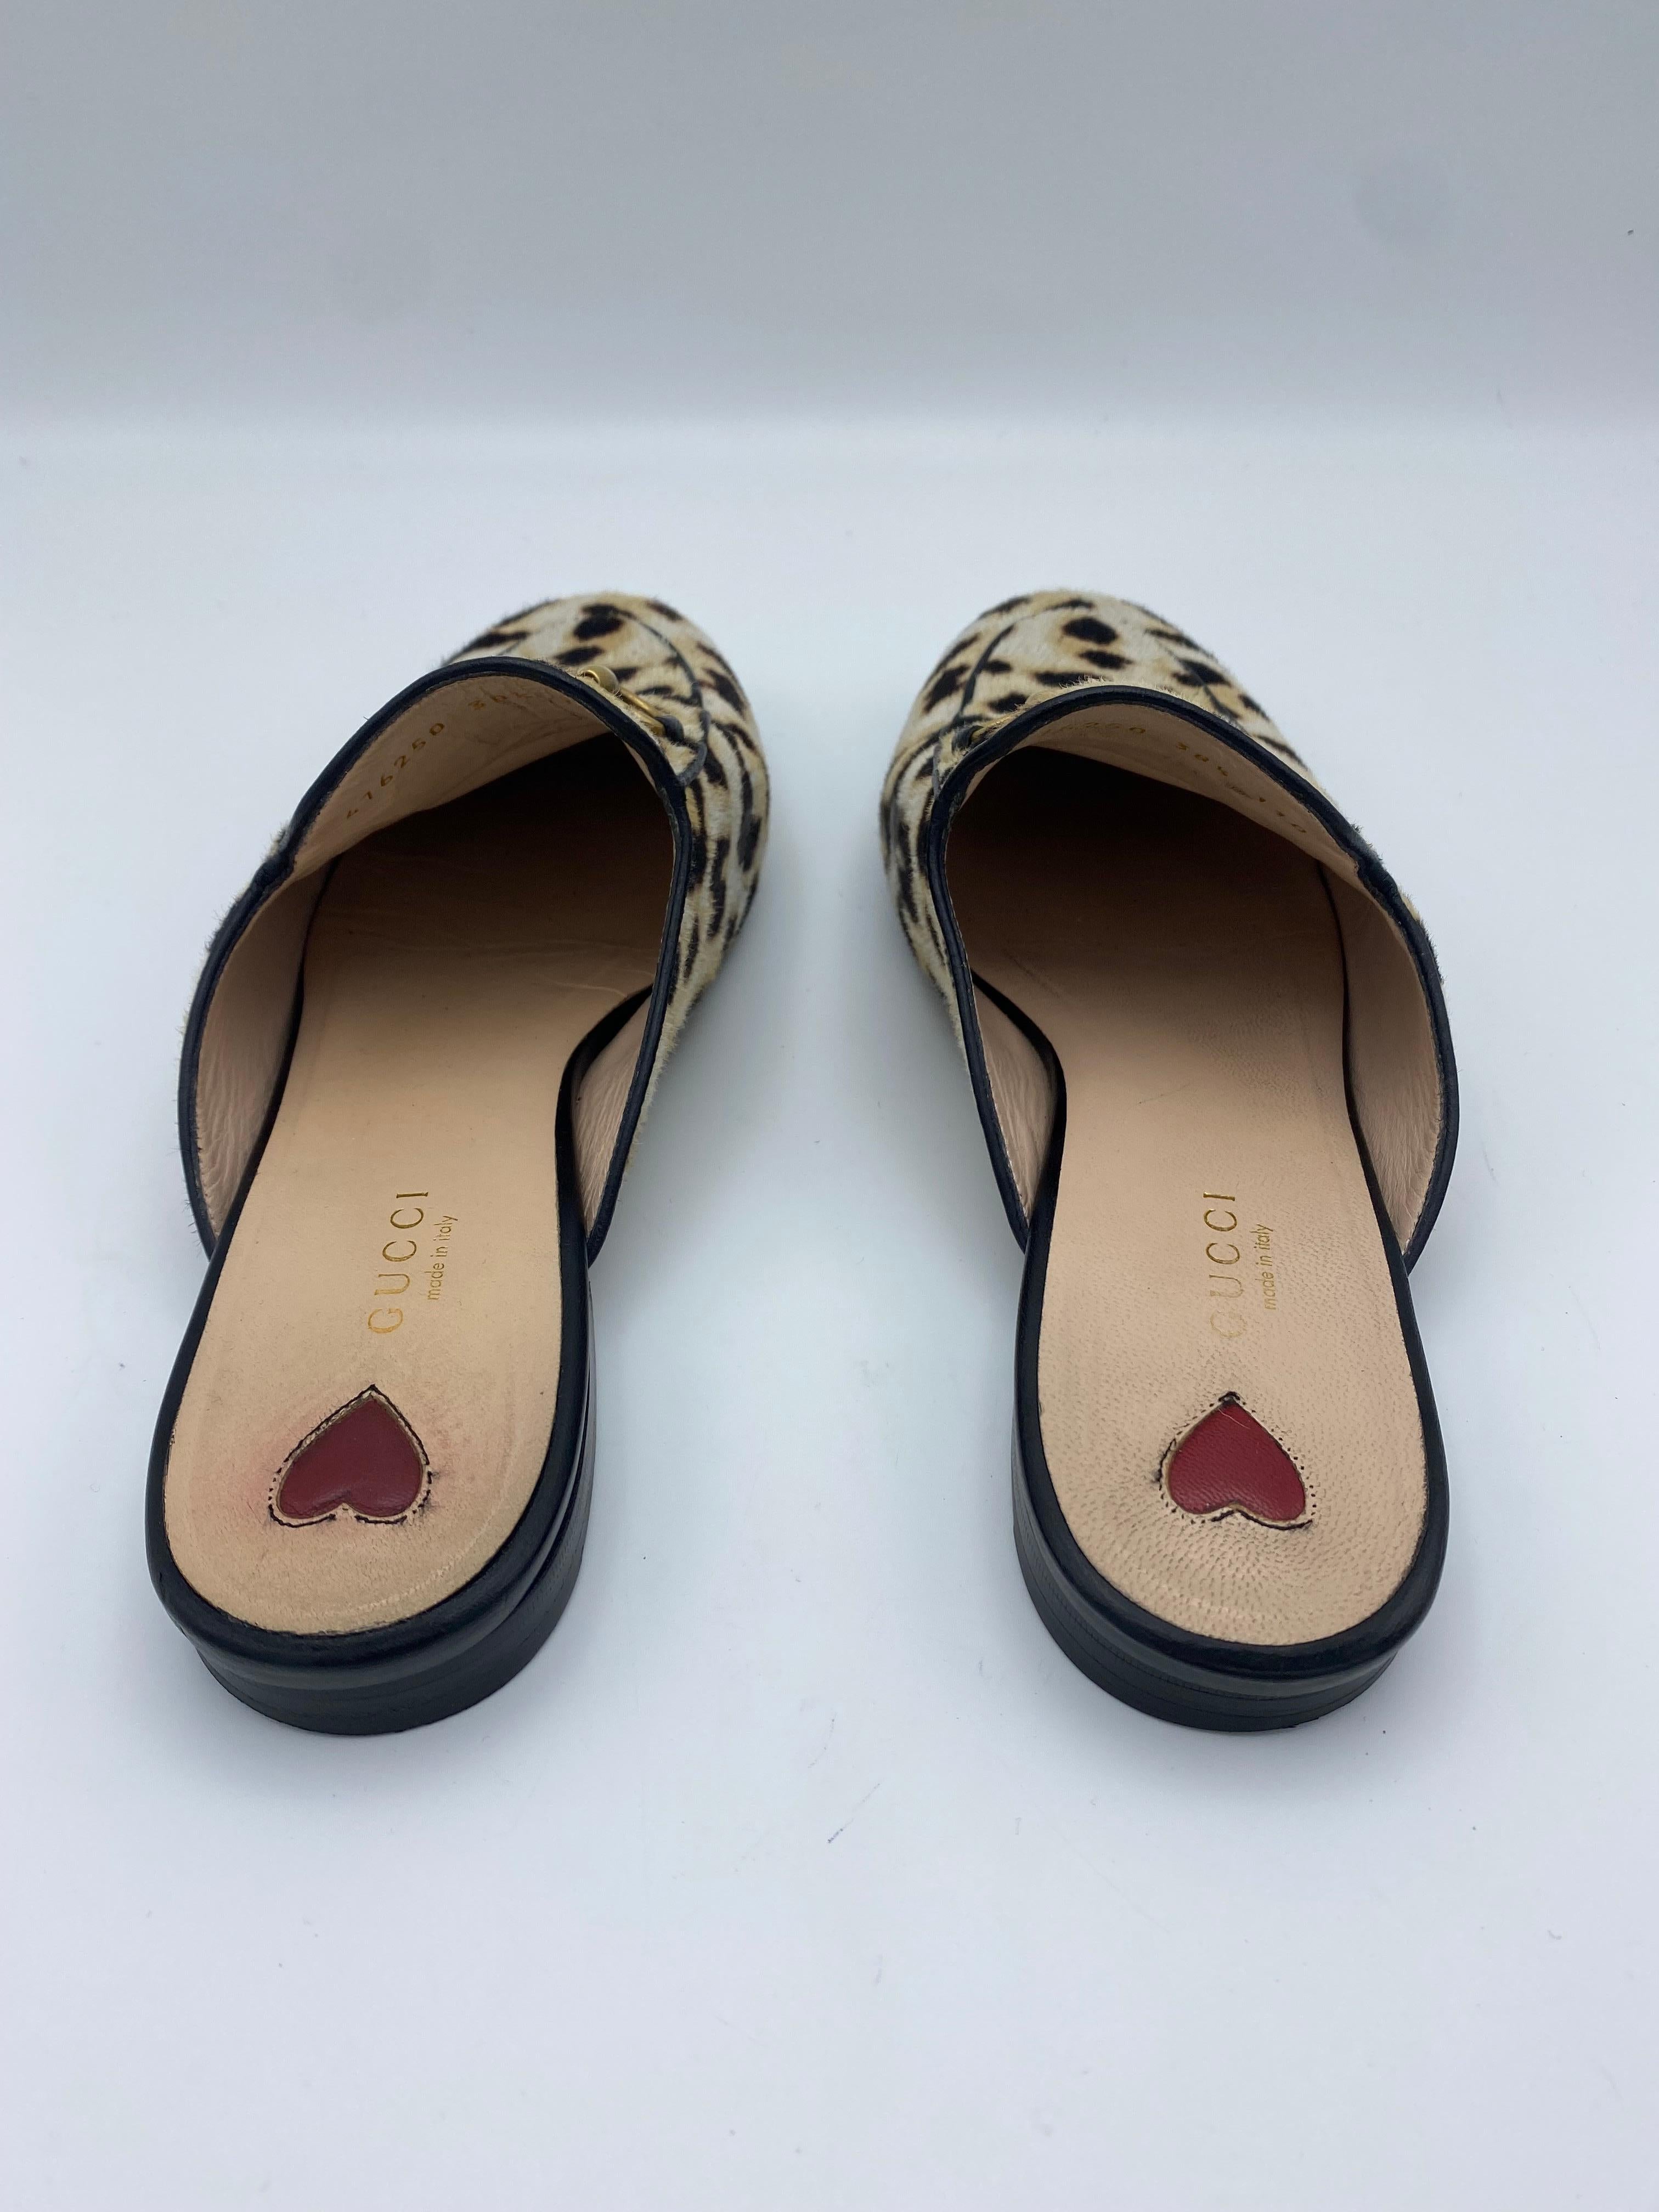 Women's Gucci Princetown Leopard Calf Hair Slippers, Size  38.5